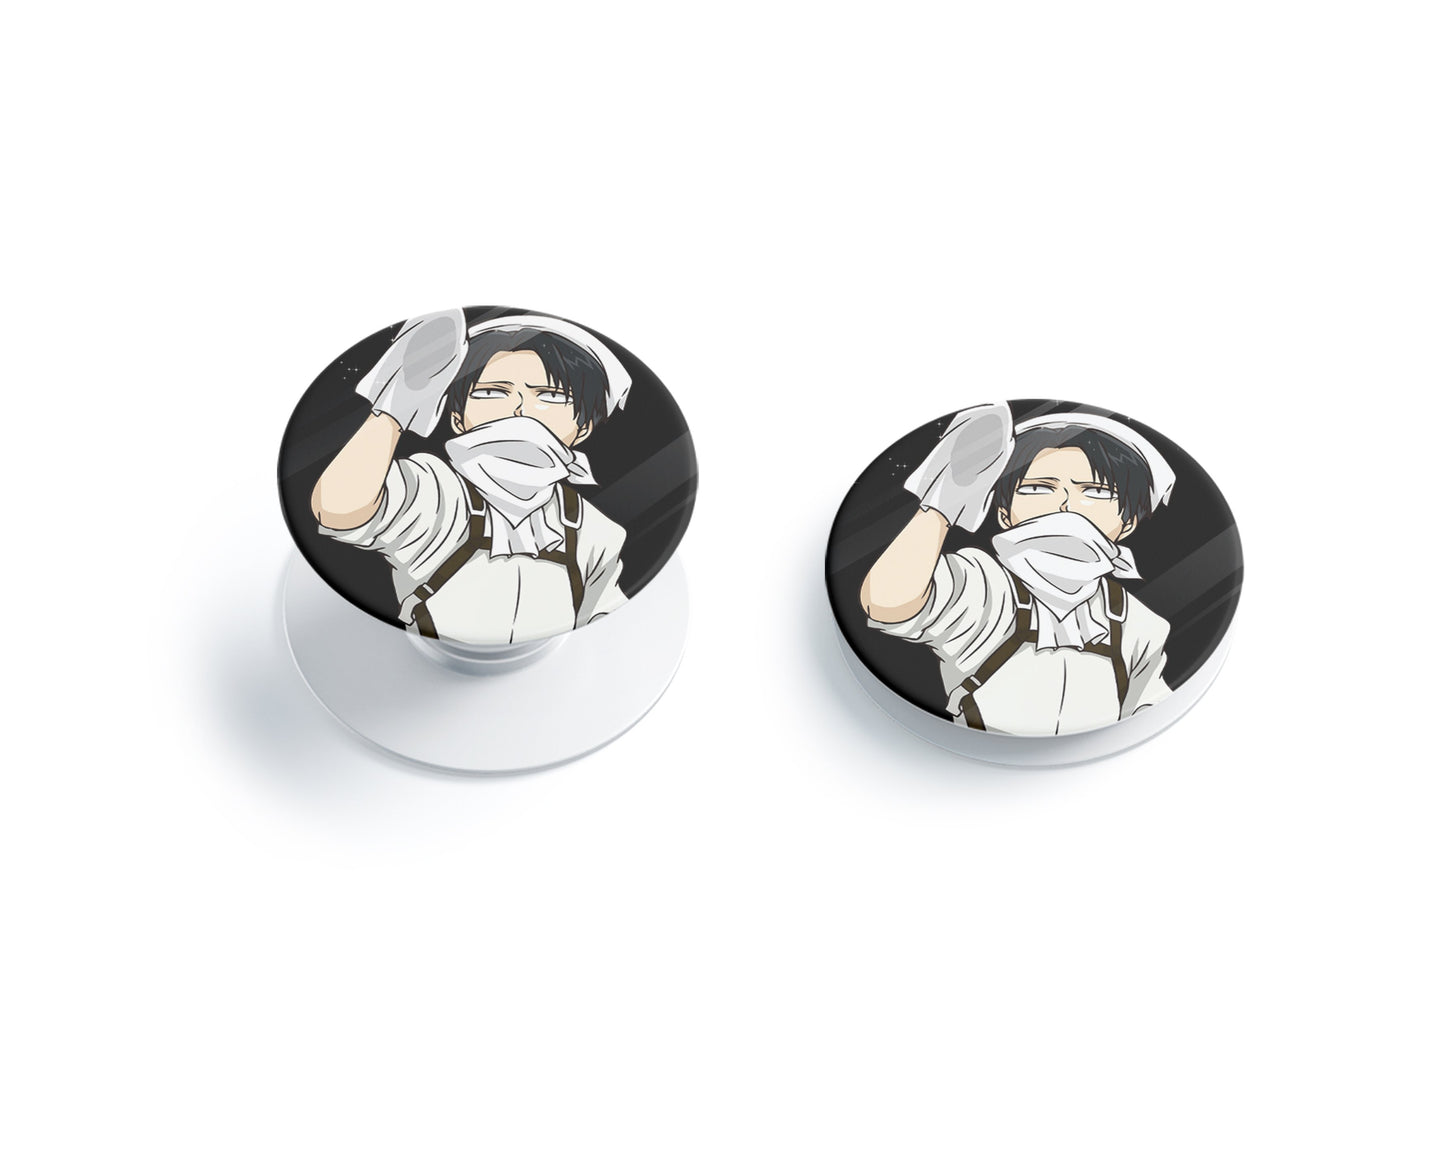 Anime Town Creations Pop Grip Attack on Titan Levi Cleaning Black Vinyl only Accessories - Anime Attack on Titan Pop Grip Skin